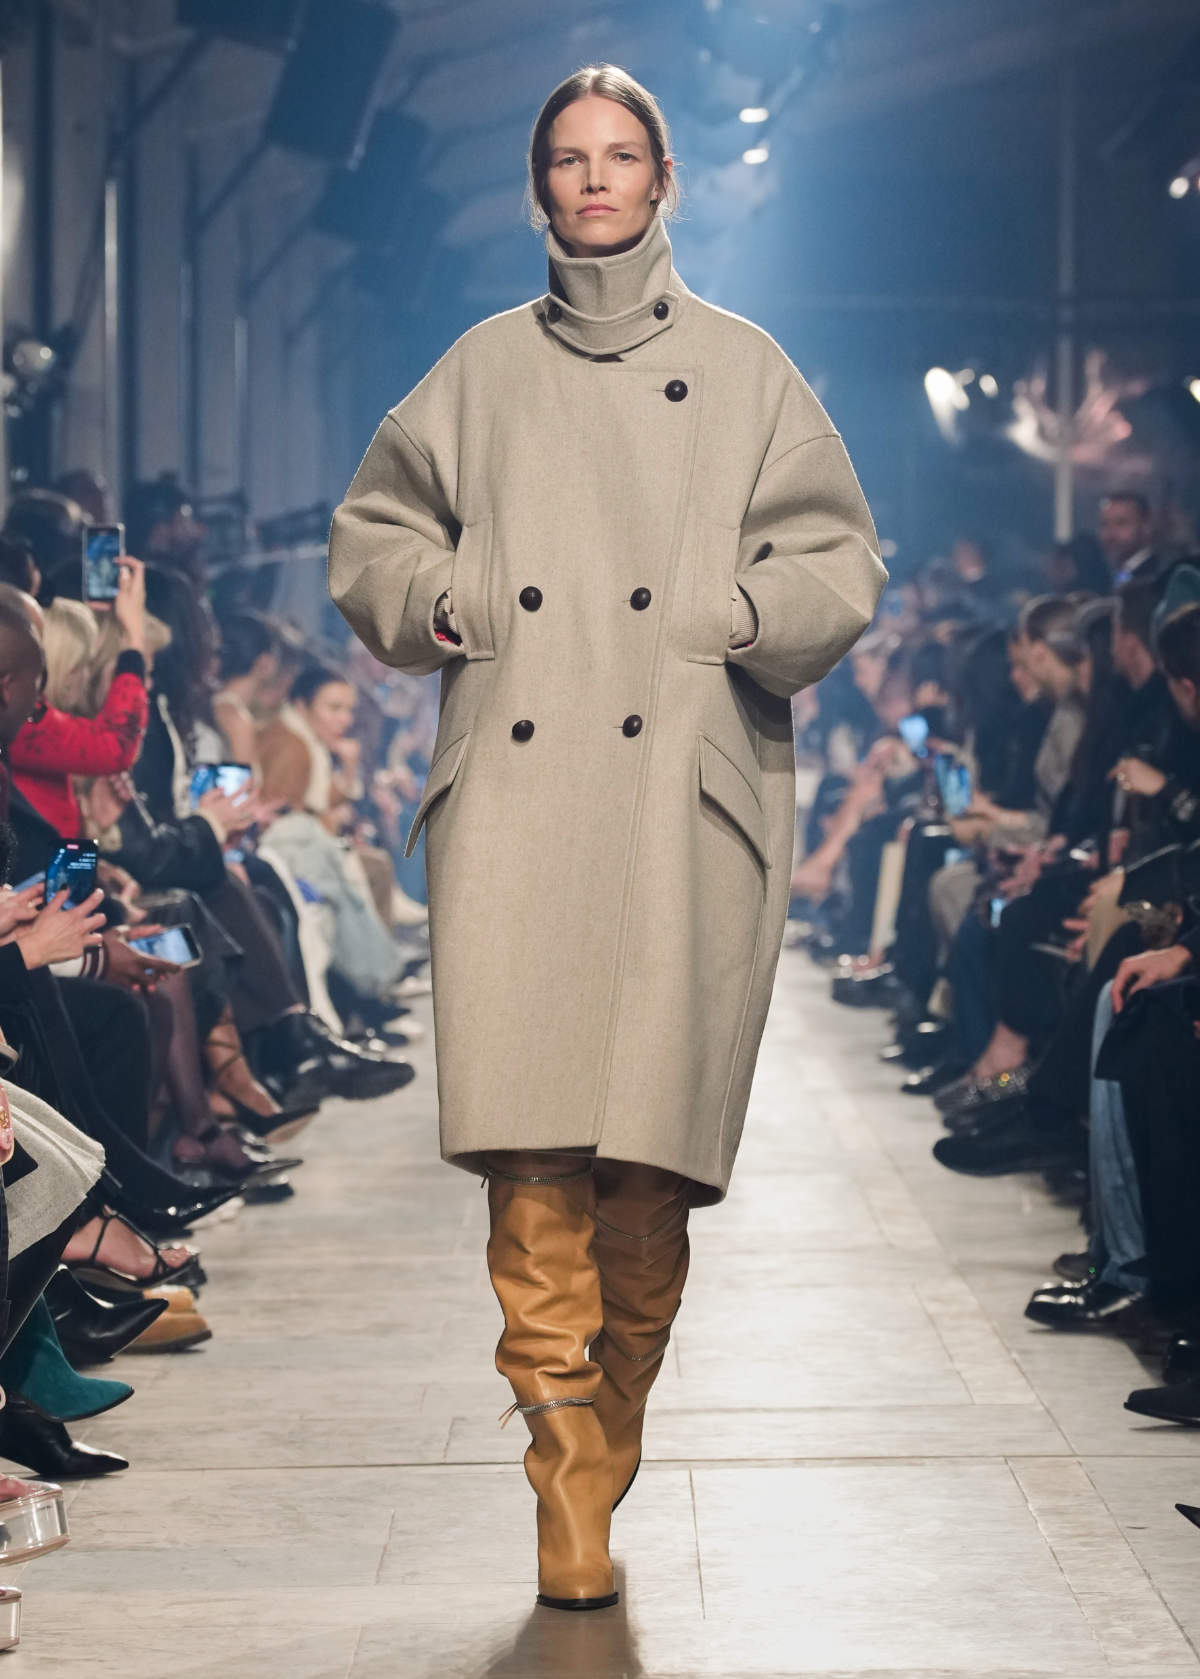 Isabel Marant Presents Its New Fall-Winter 2023 Collection